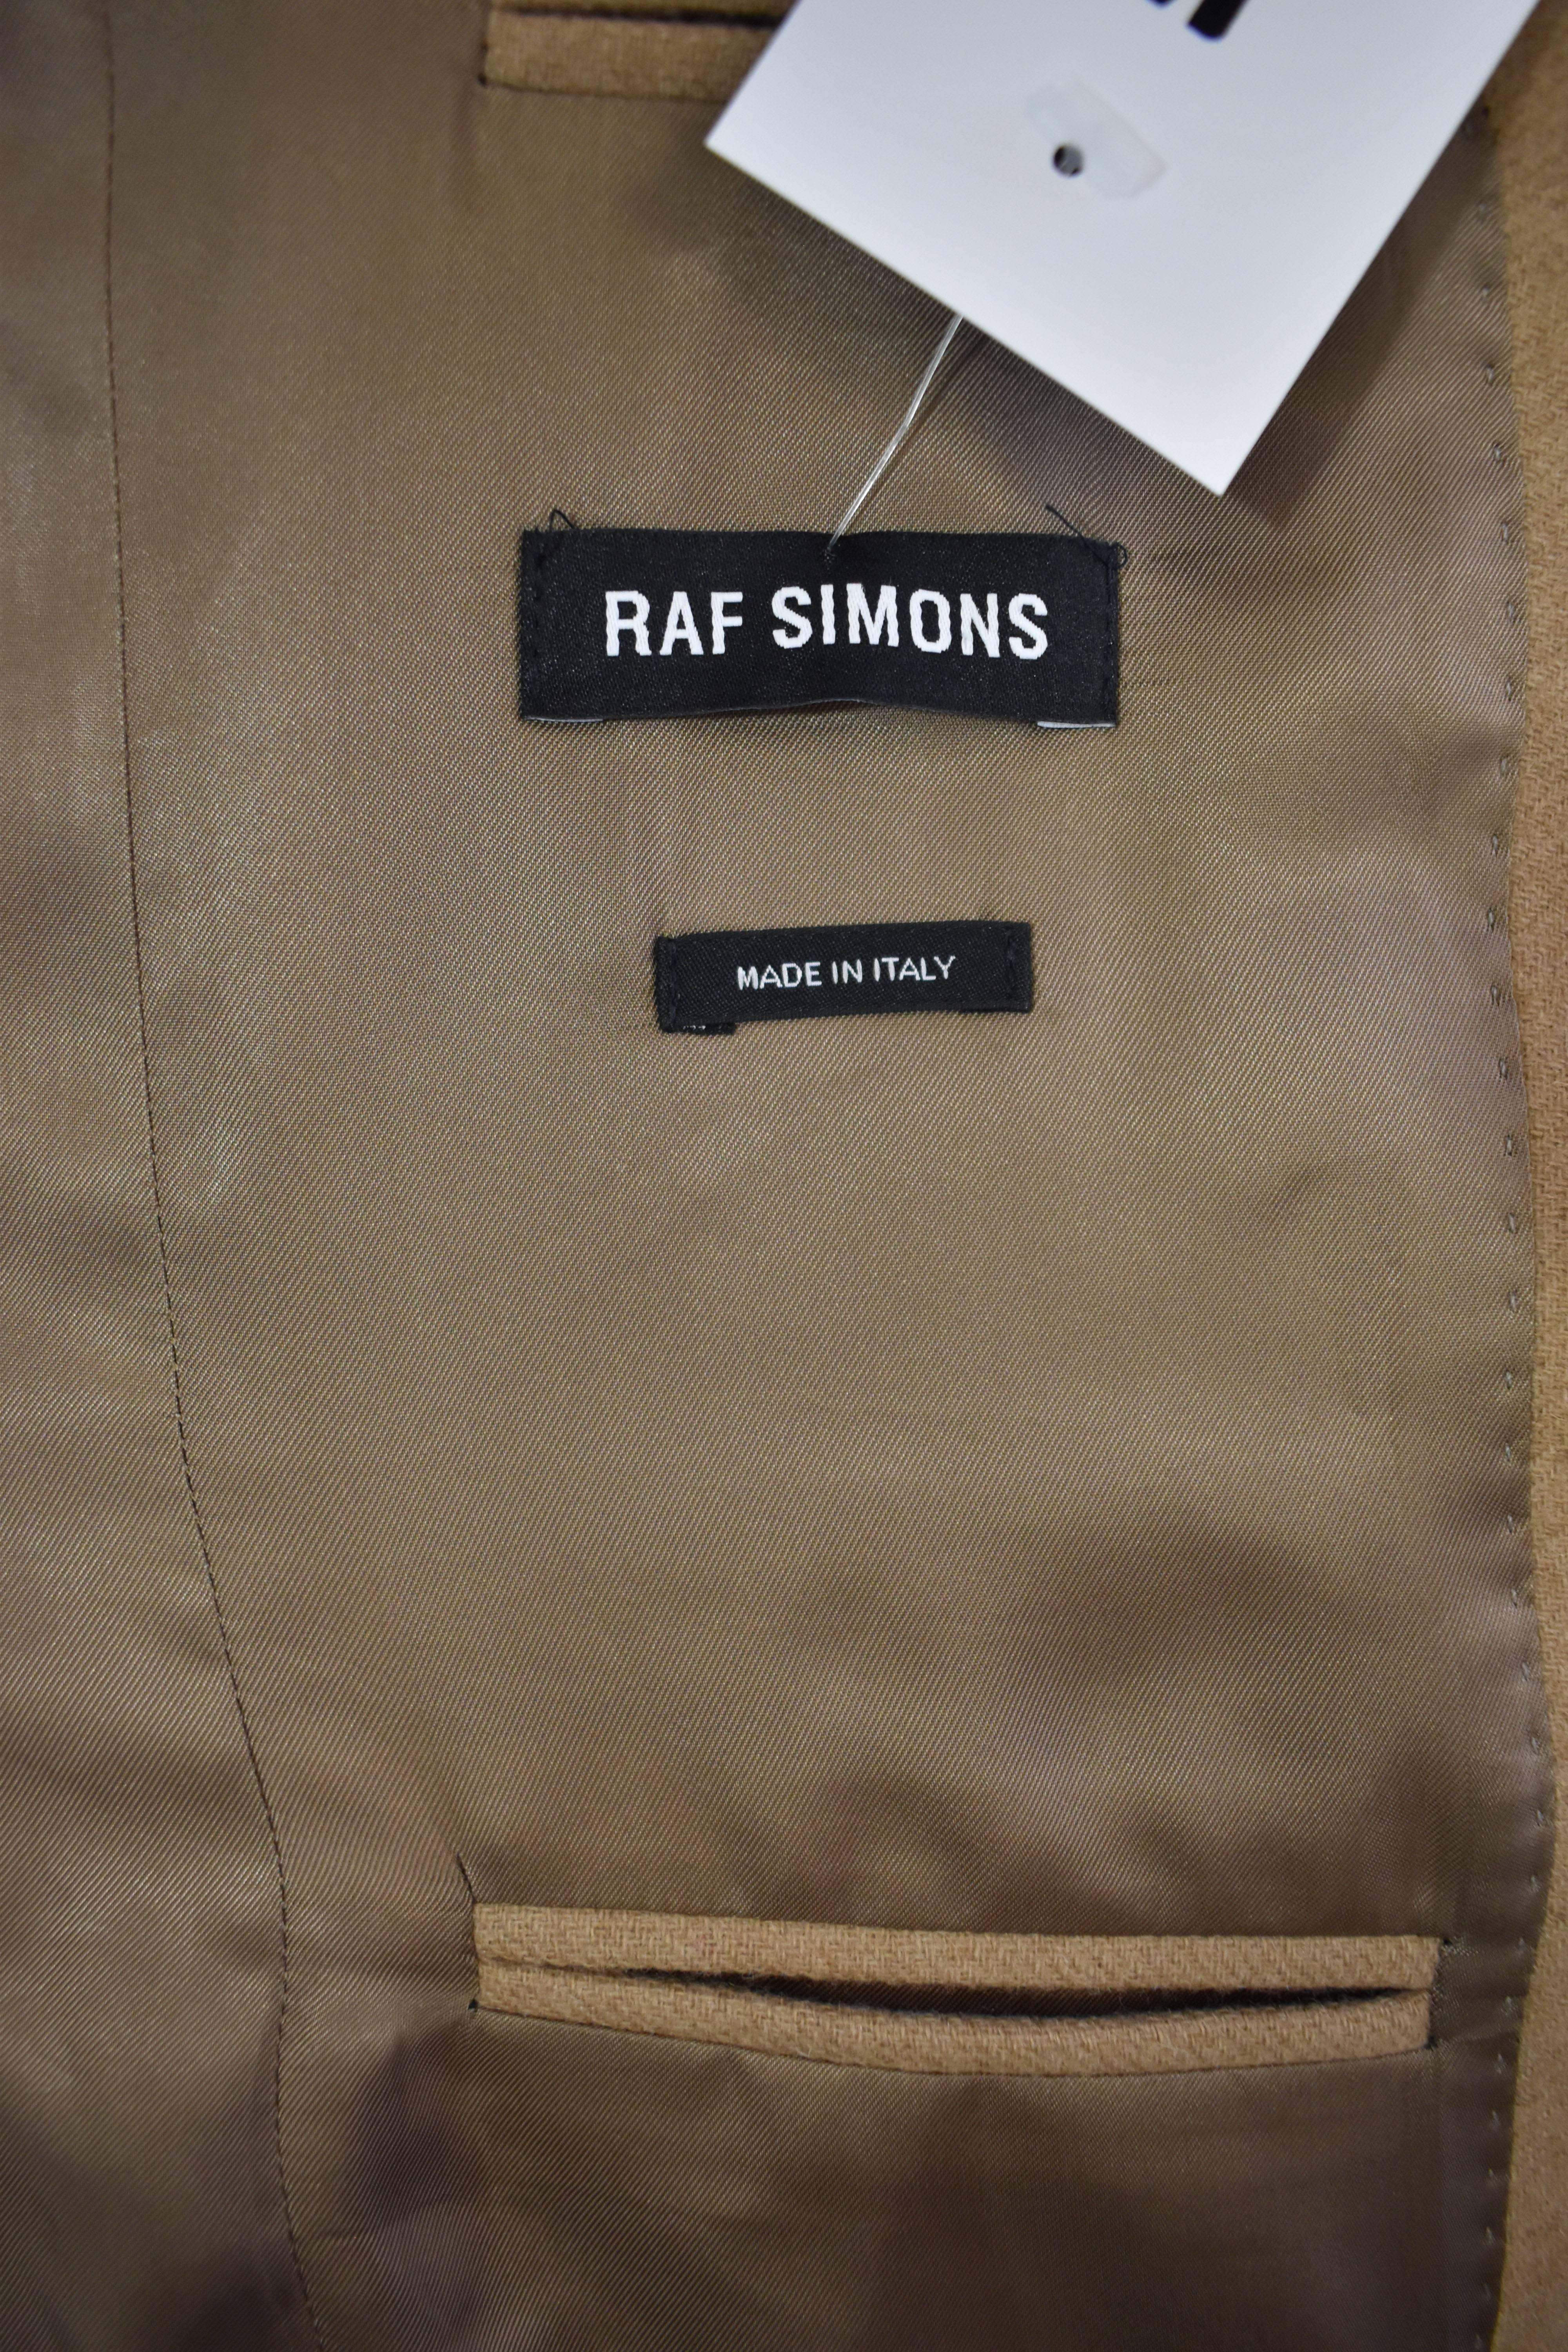 Raf Simons Camel Wool Blazer In Excellent Condition For Sale In London, GB